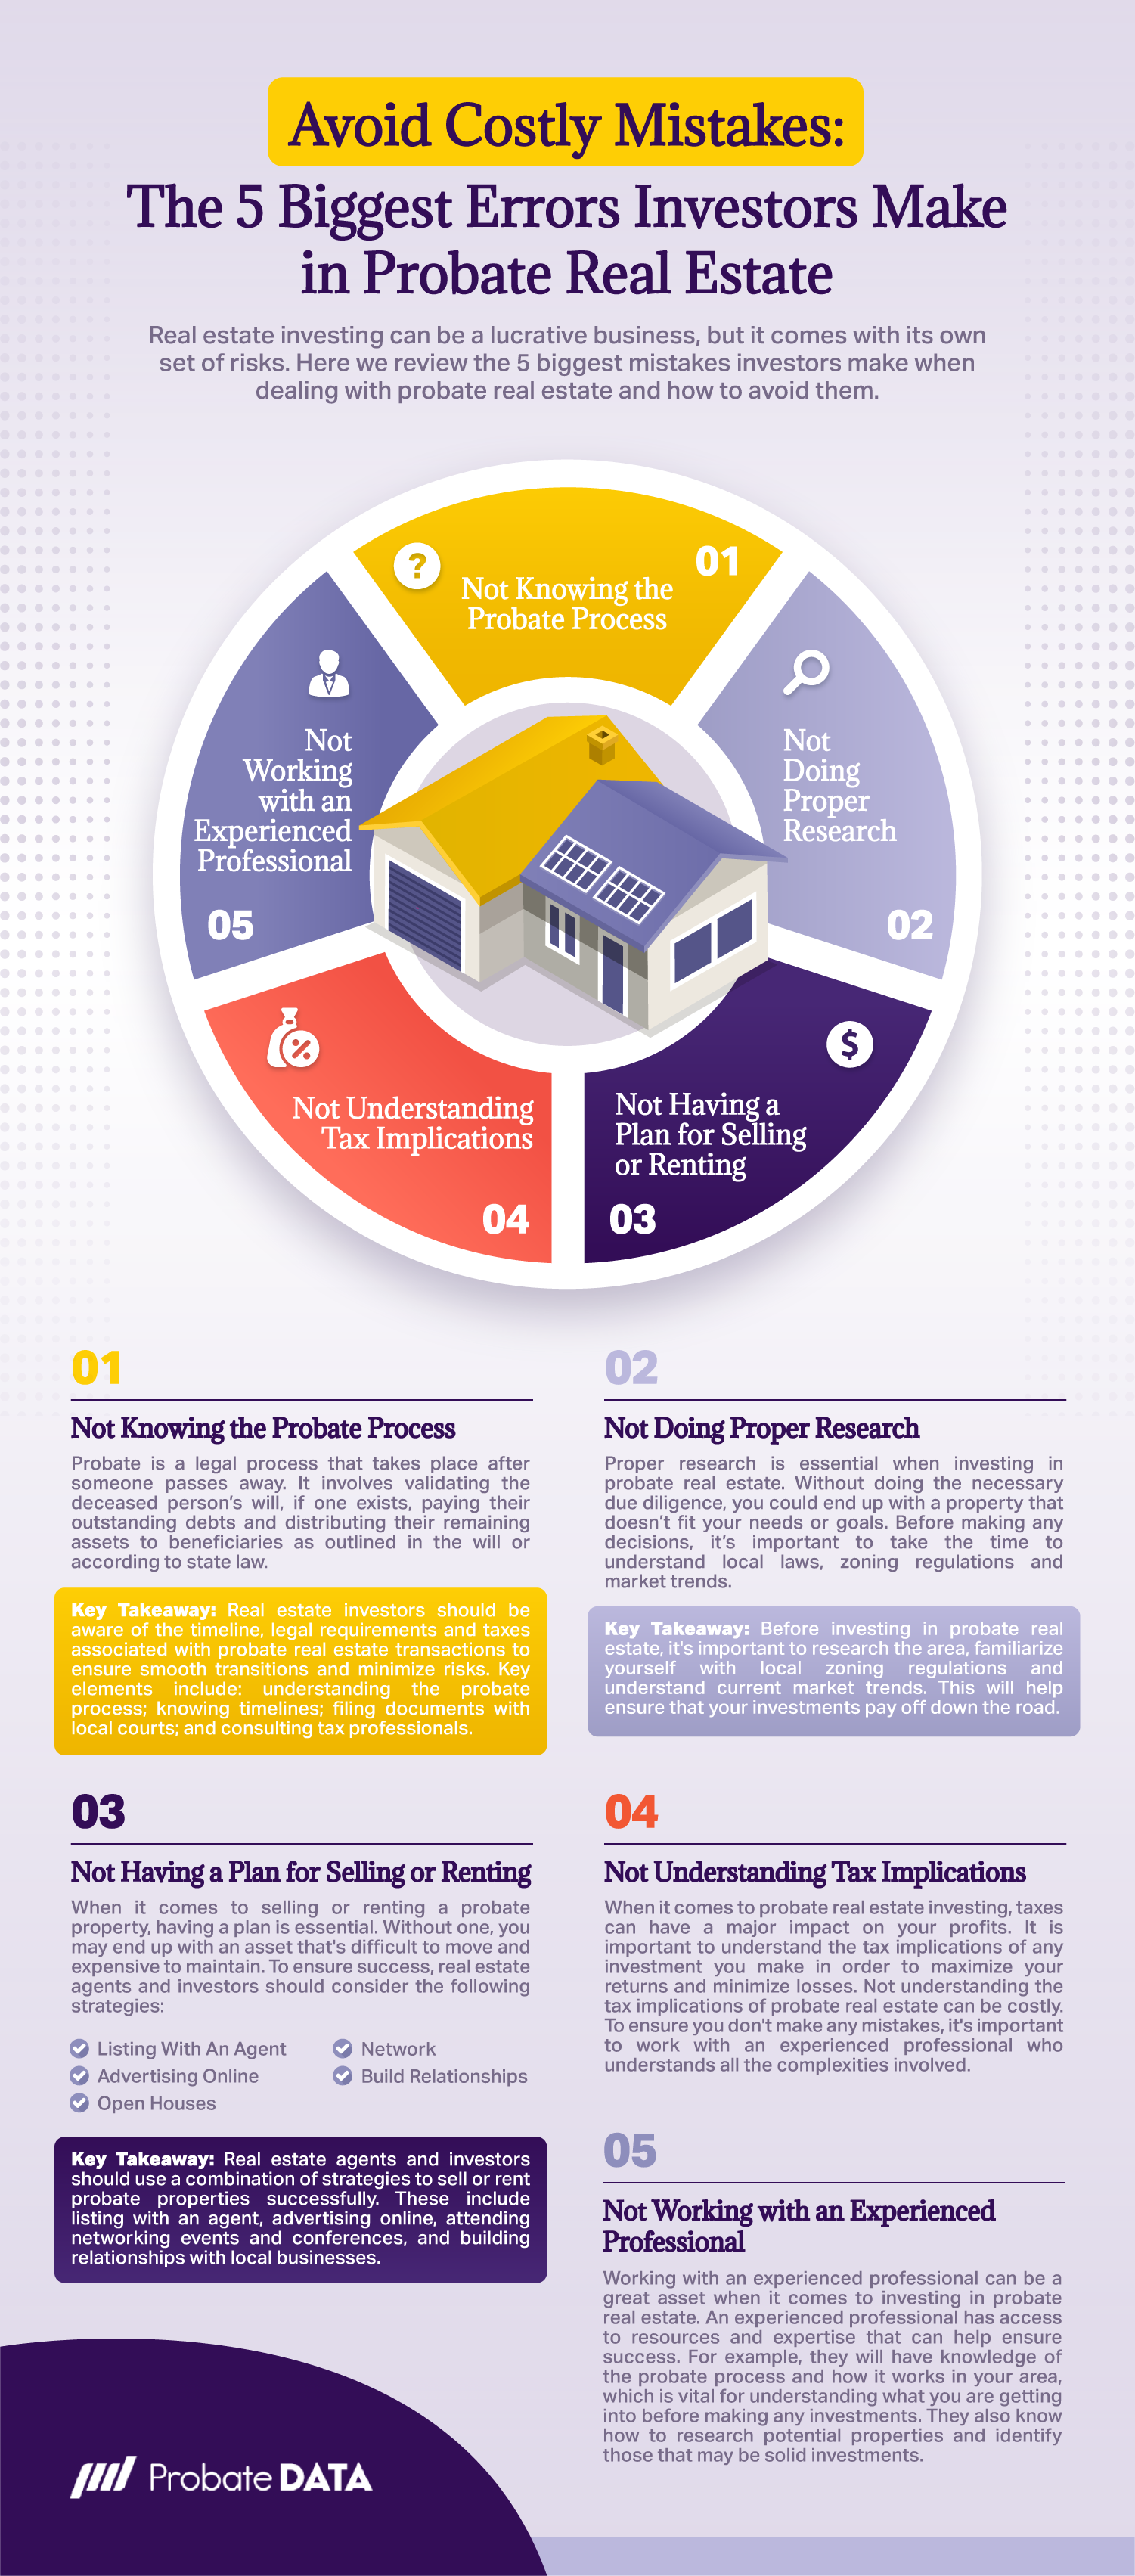 The 5 Biggest Mistakes Investors Make in Probate Real Estate and How to Avoid Them Infographic FINAL